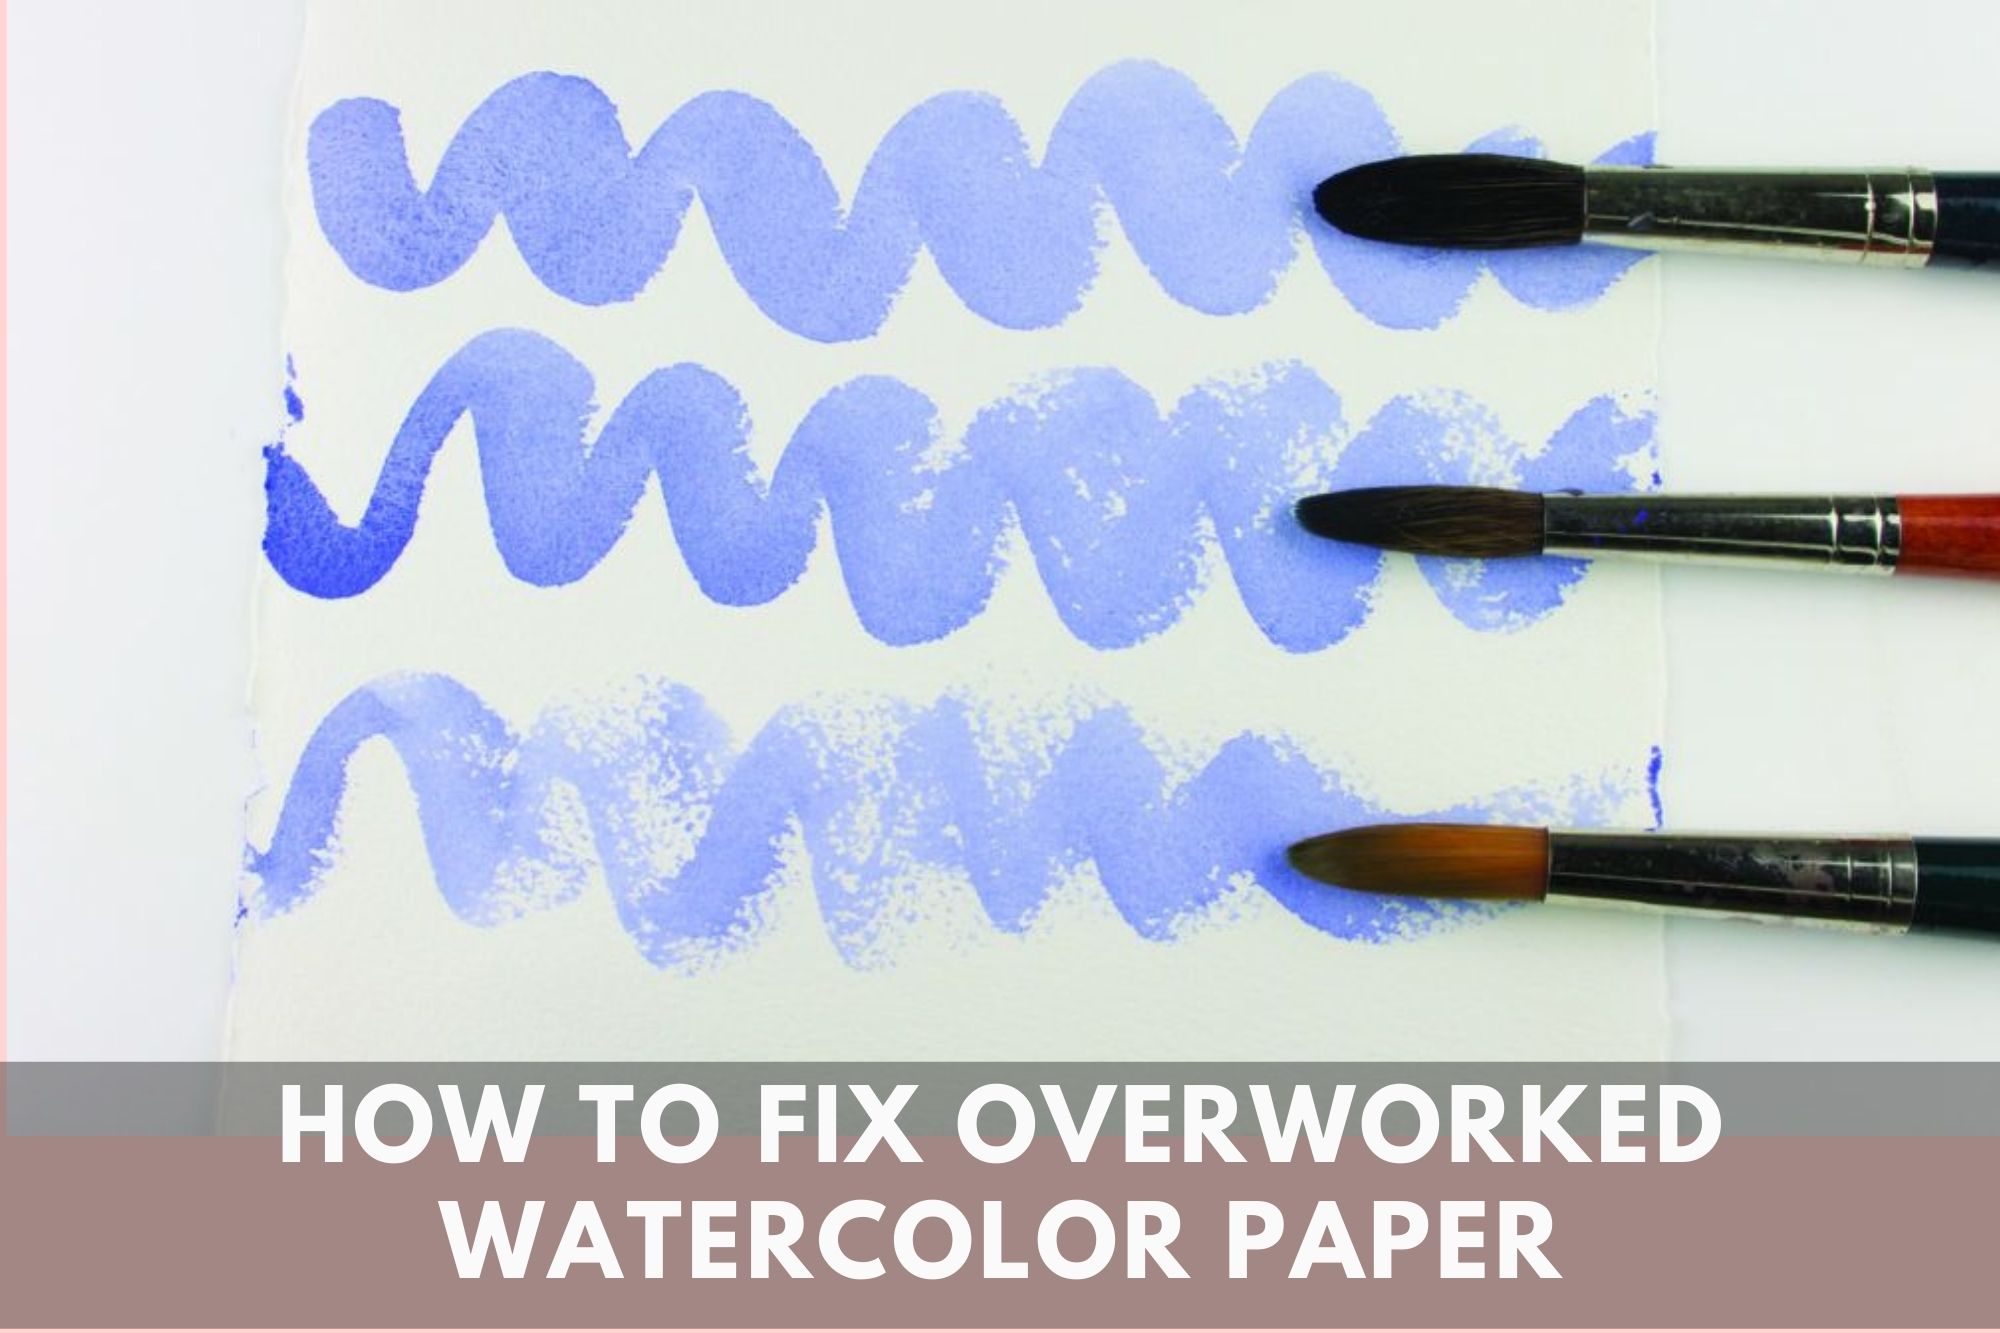 How to Fix Overworked Watercolor Paper